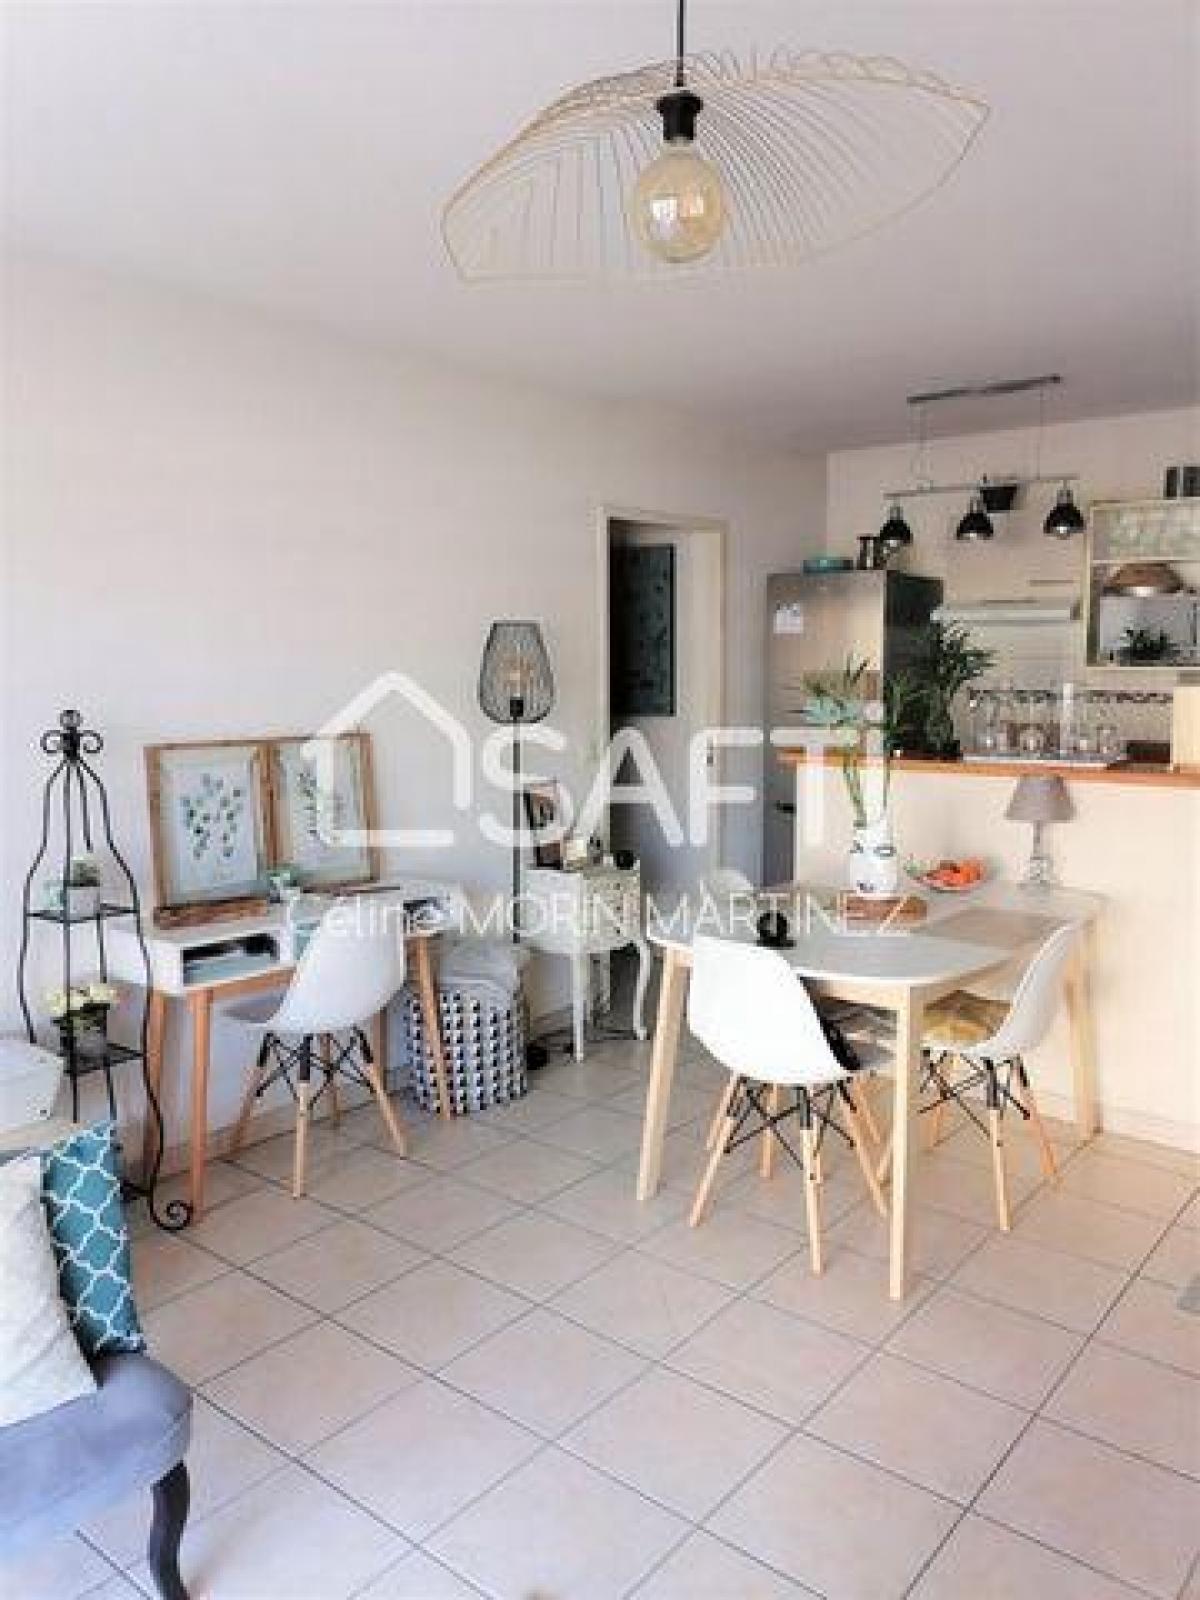 Picture of Apartment For Sale in Pau, Aquitaine, France